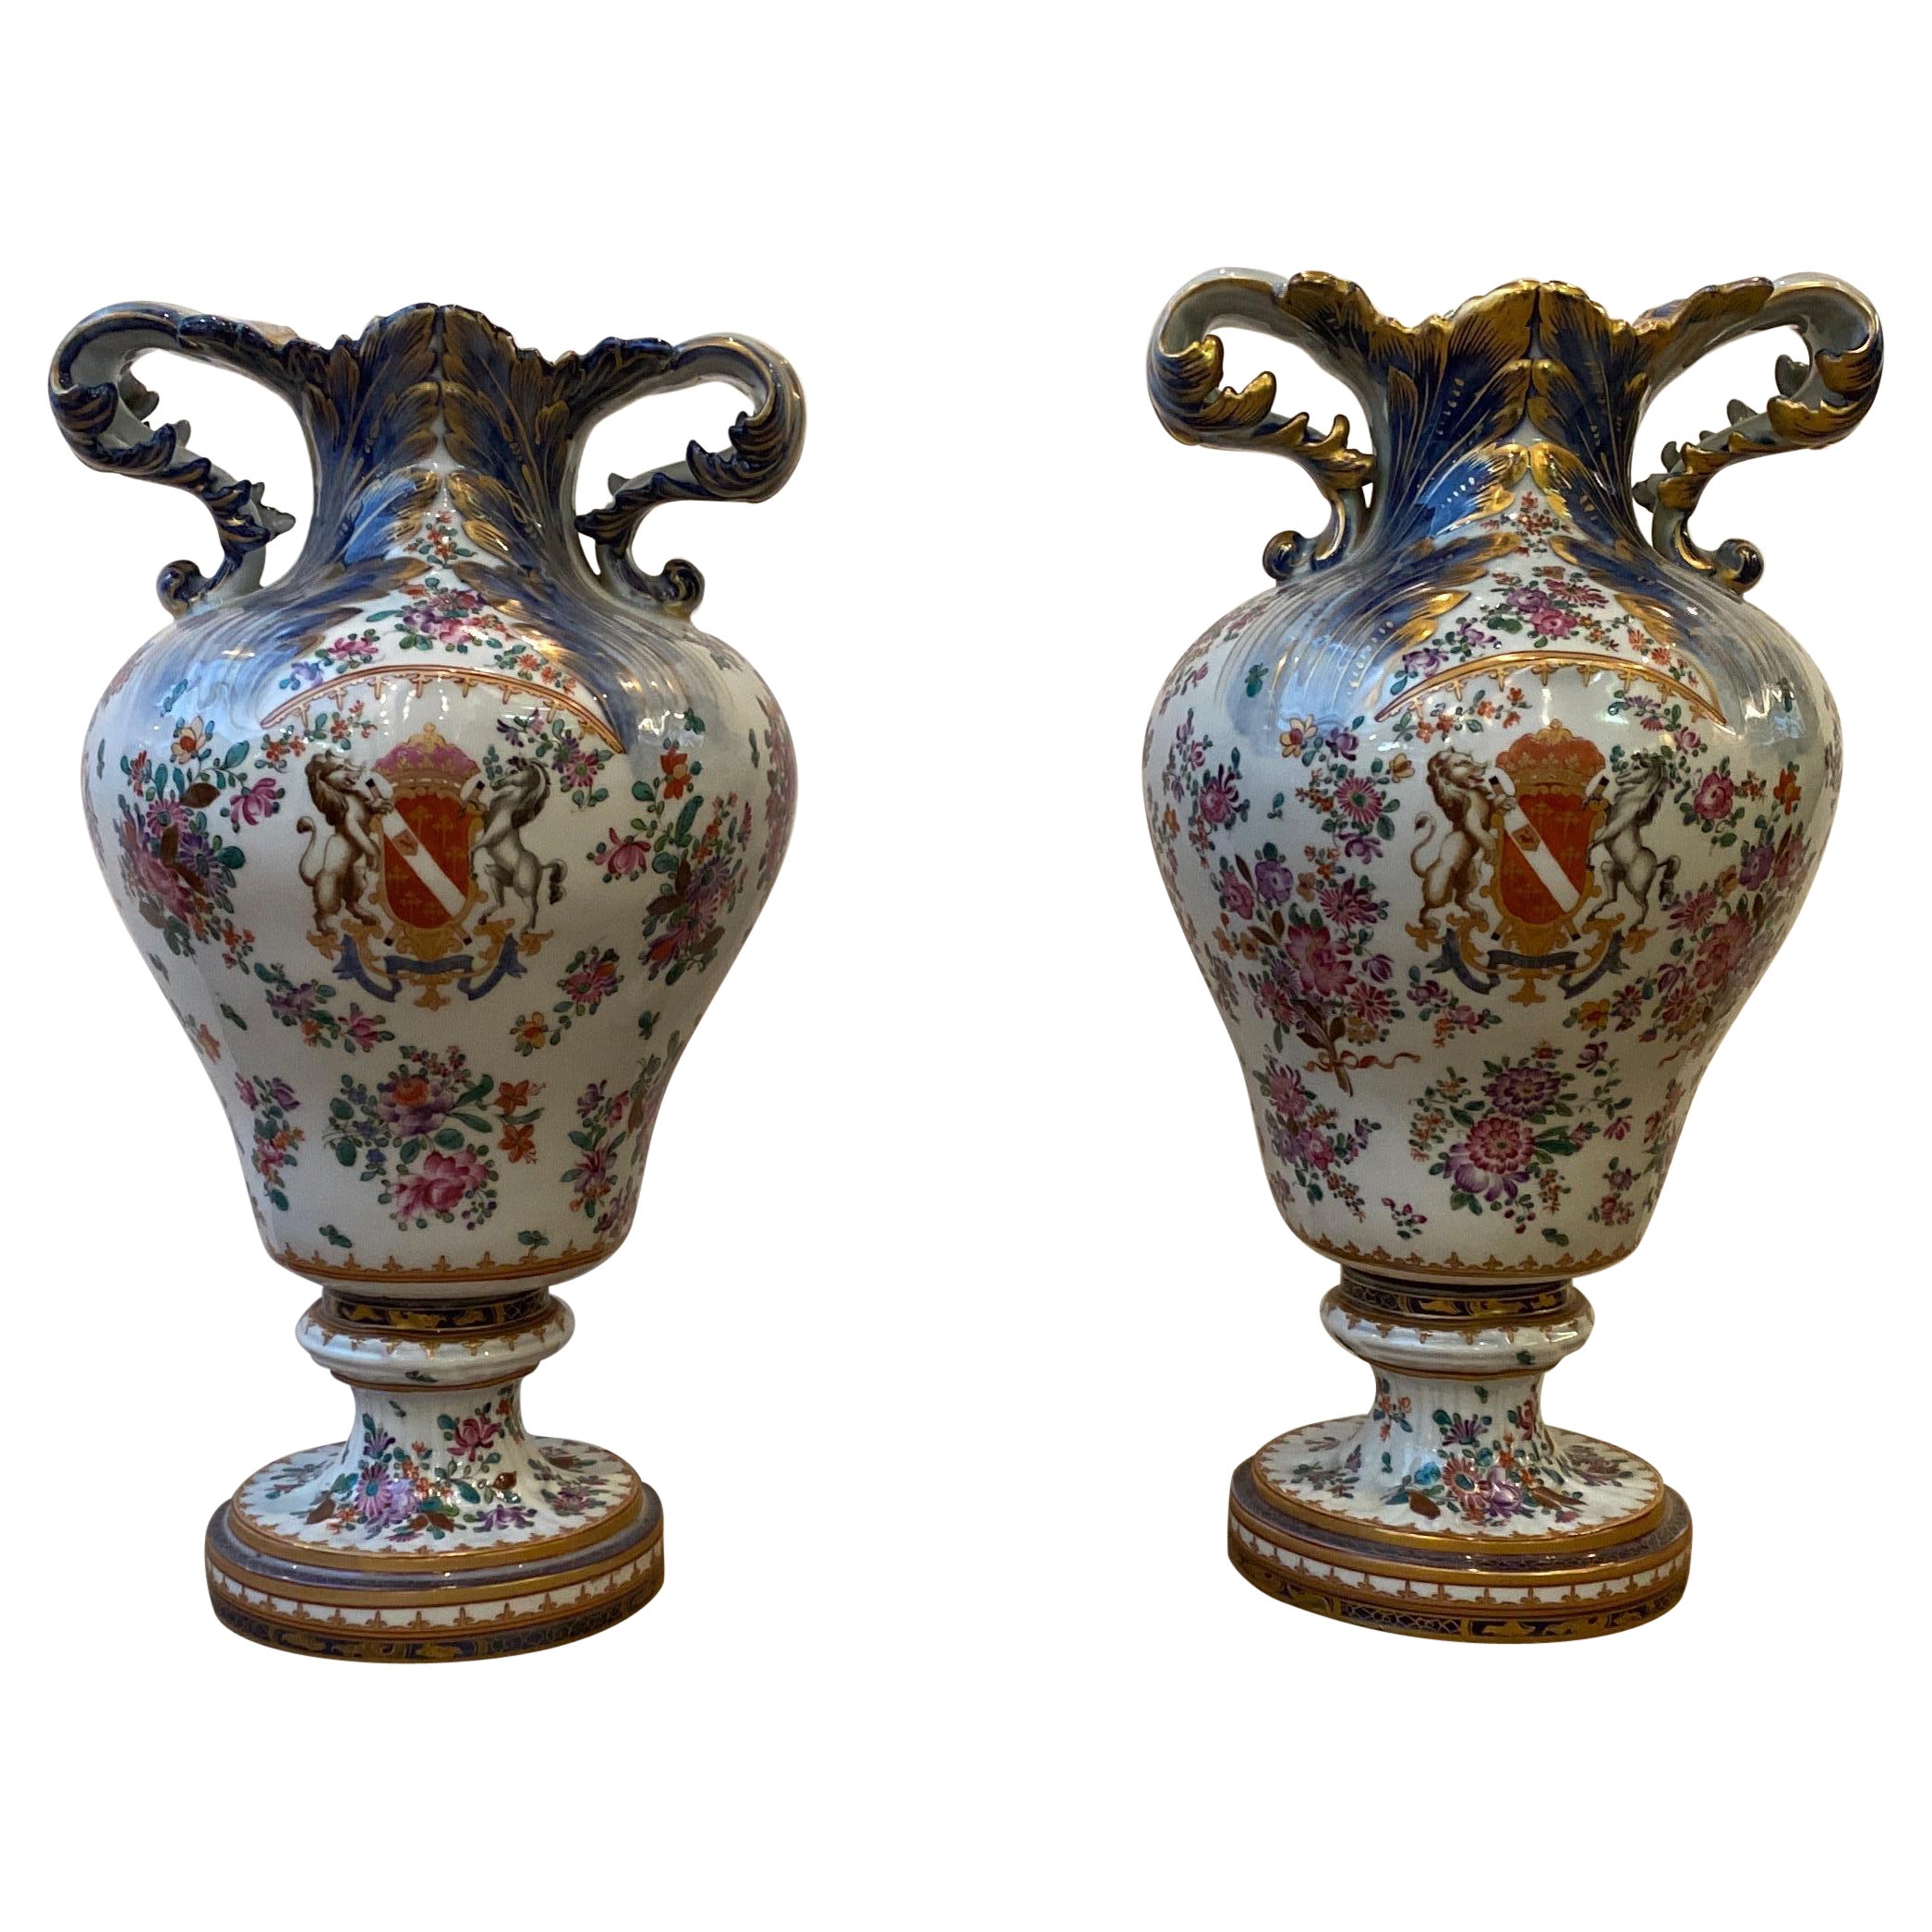 Pair of Porcelain Armorial Urns by Naples Capodimonte 19th Century For Sale